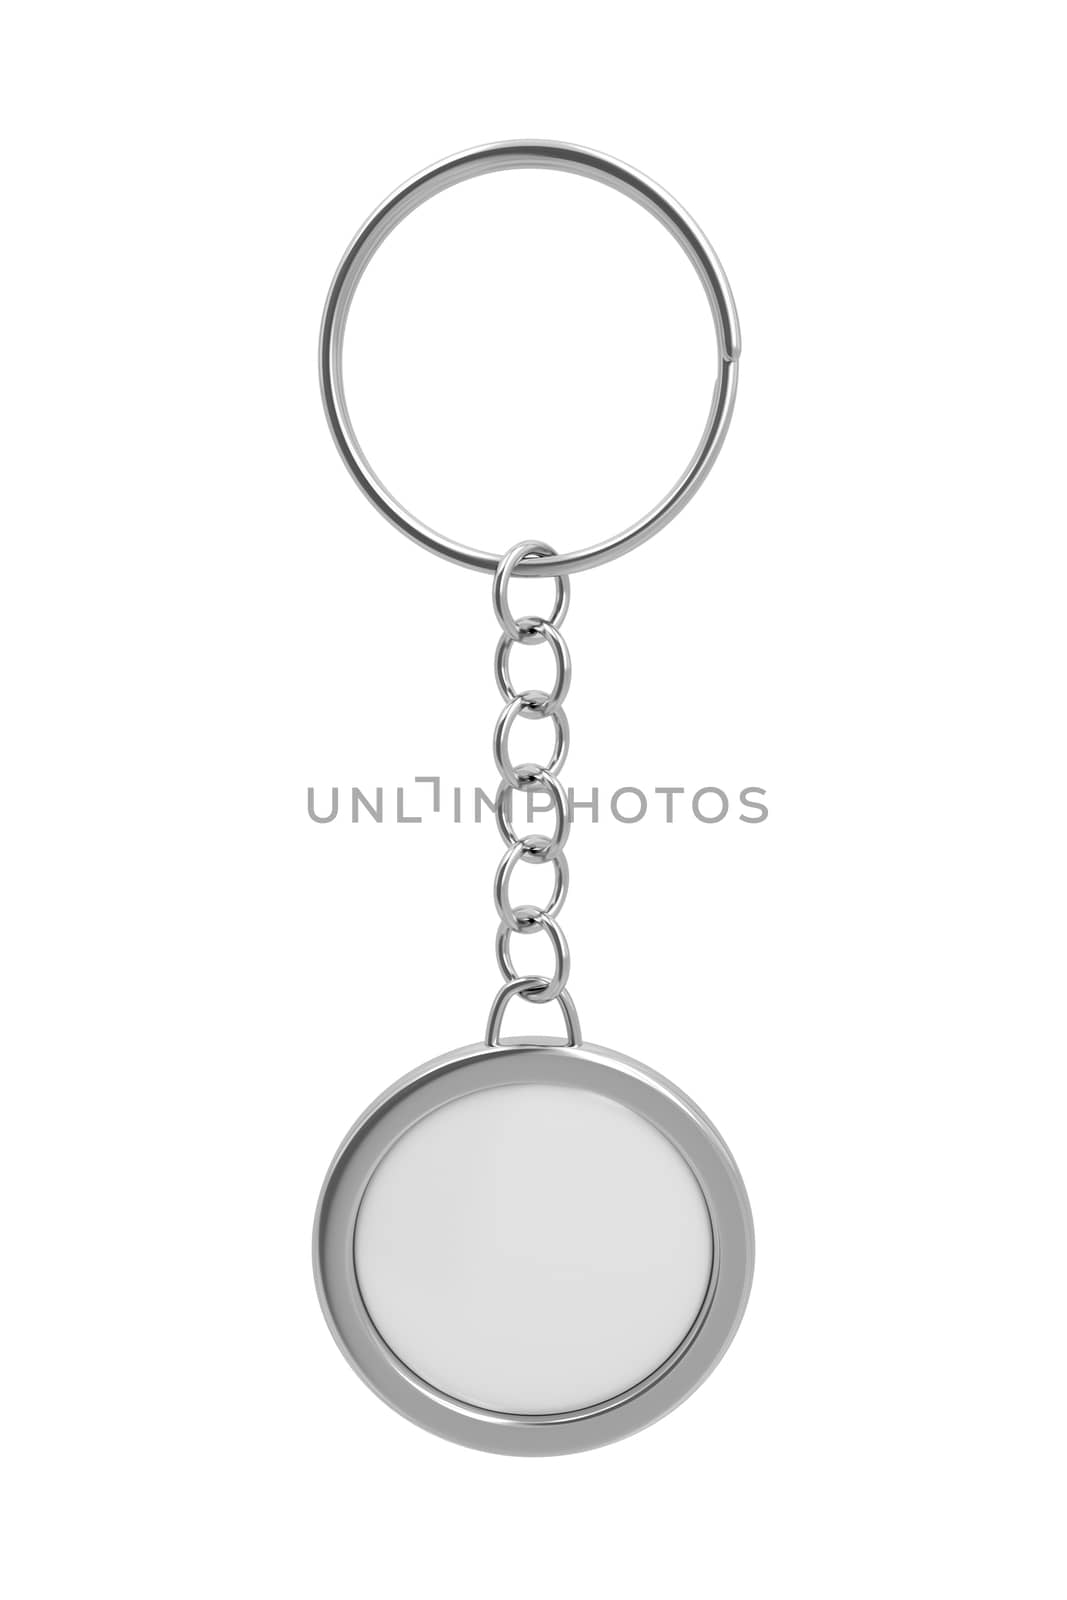 Key ring with space for text isolated on white background